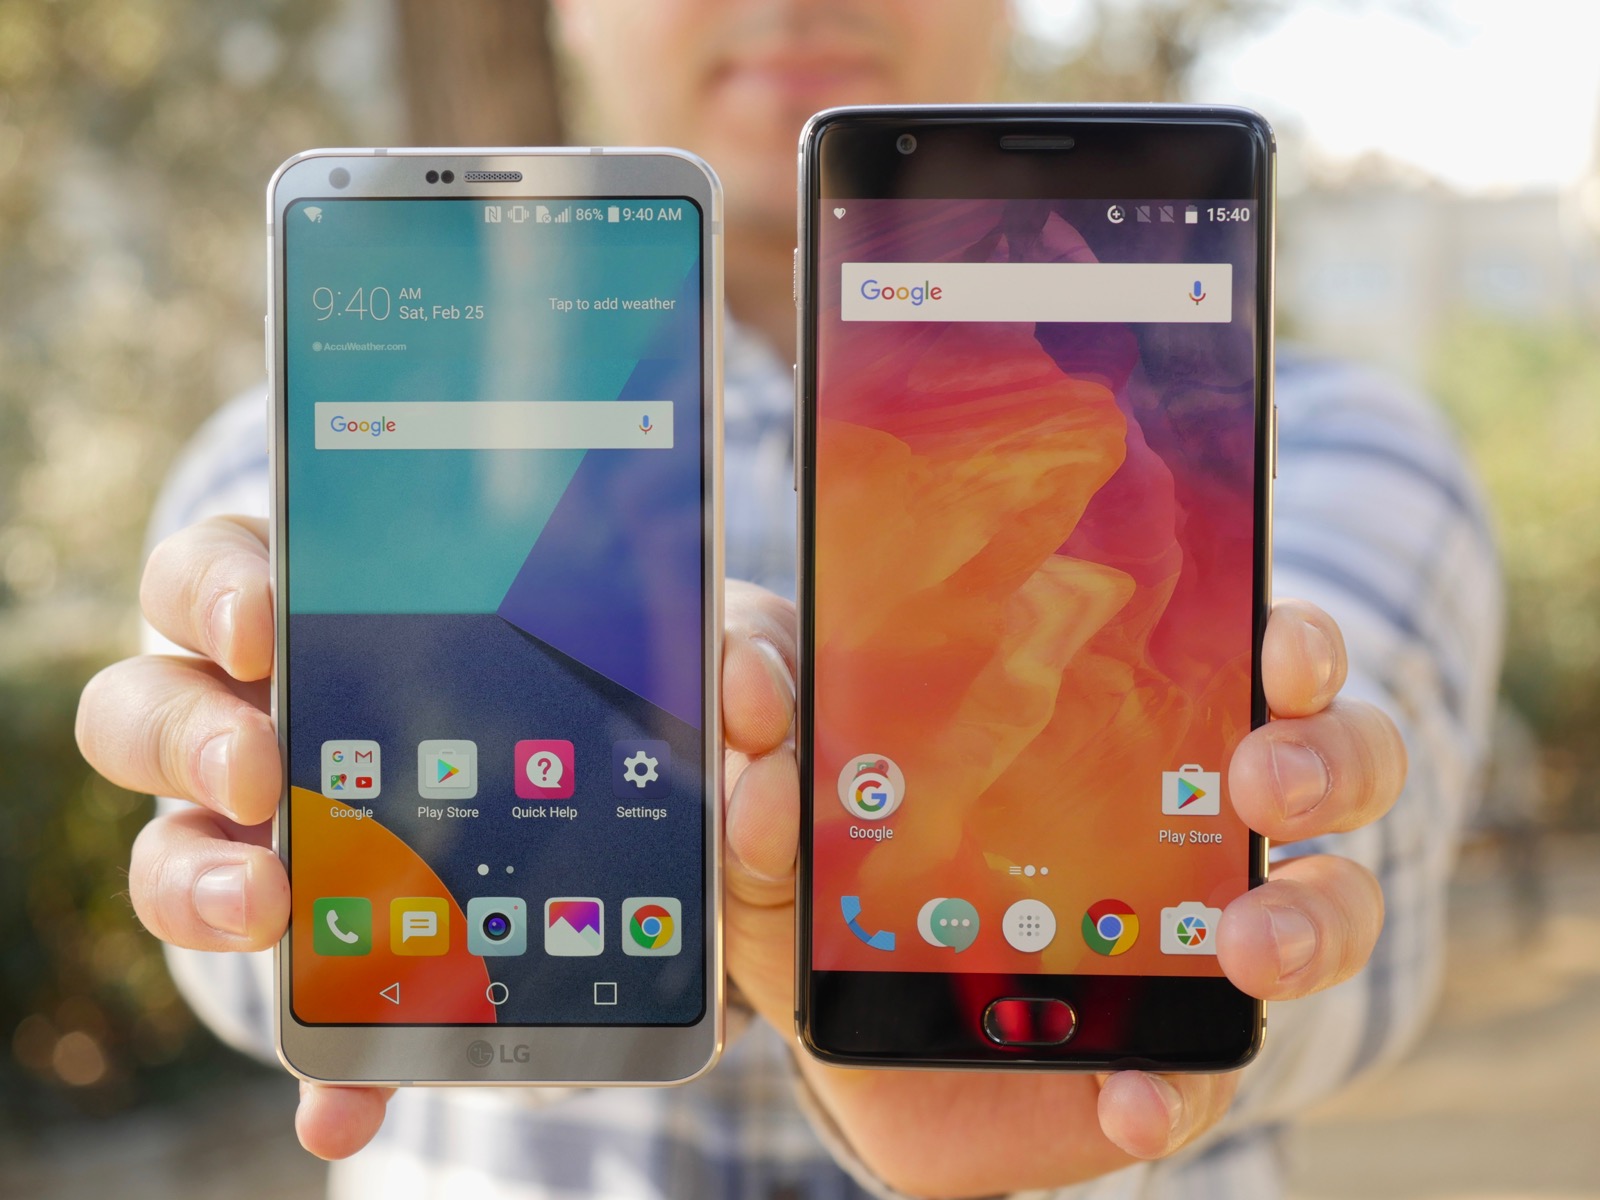 Find out the main differences between LG G6 and the OnePlus 3T